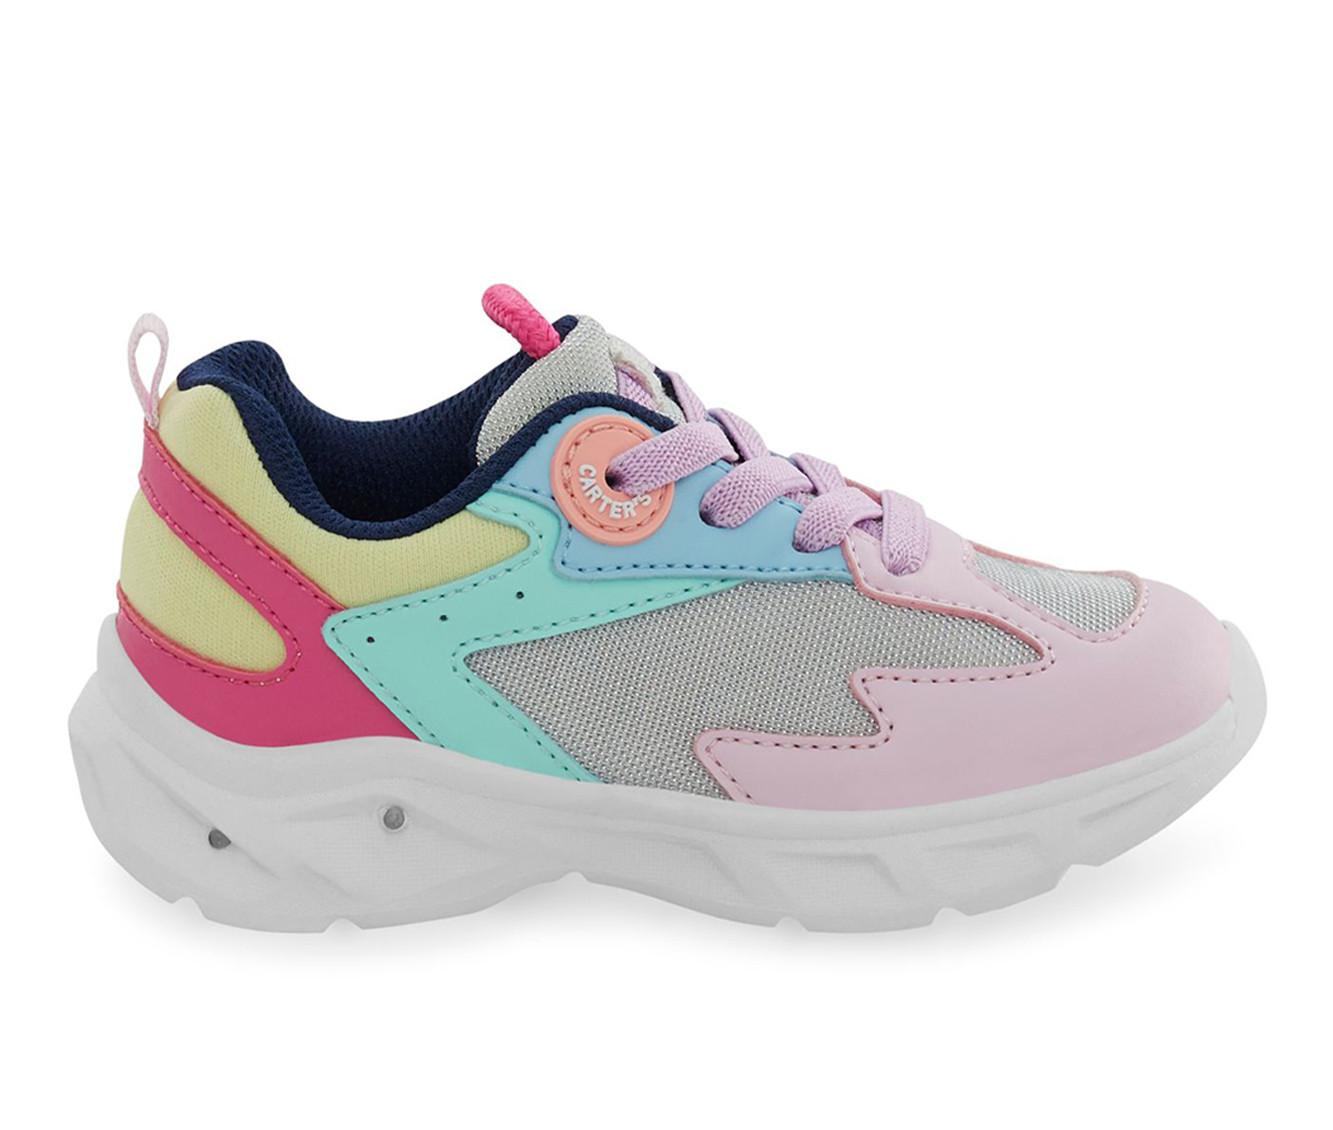 Girls' Carters Little Kid & Toddler Adusa Sneakers